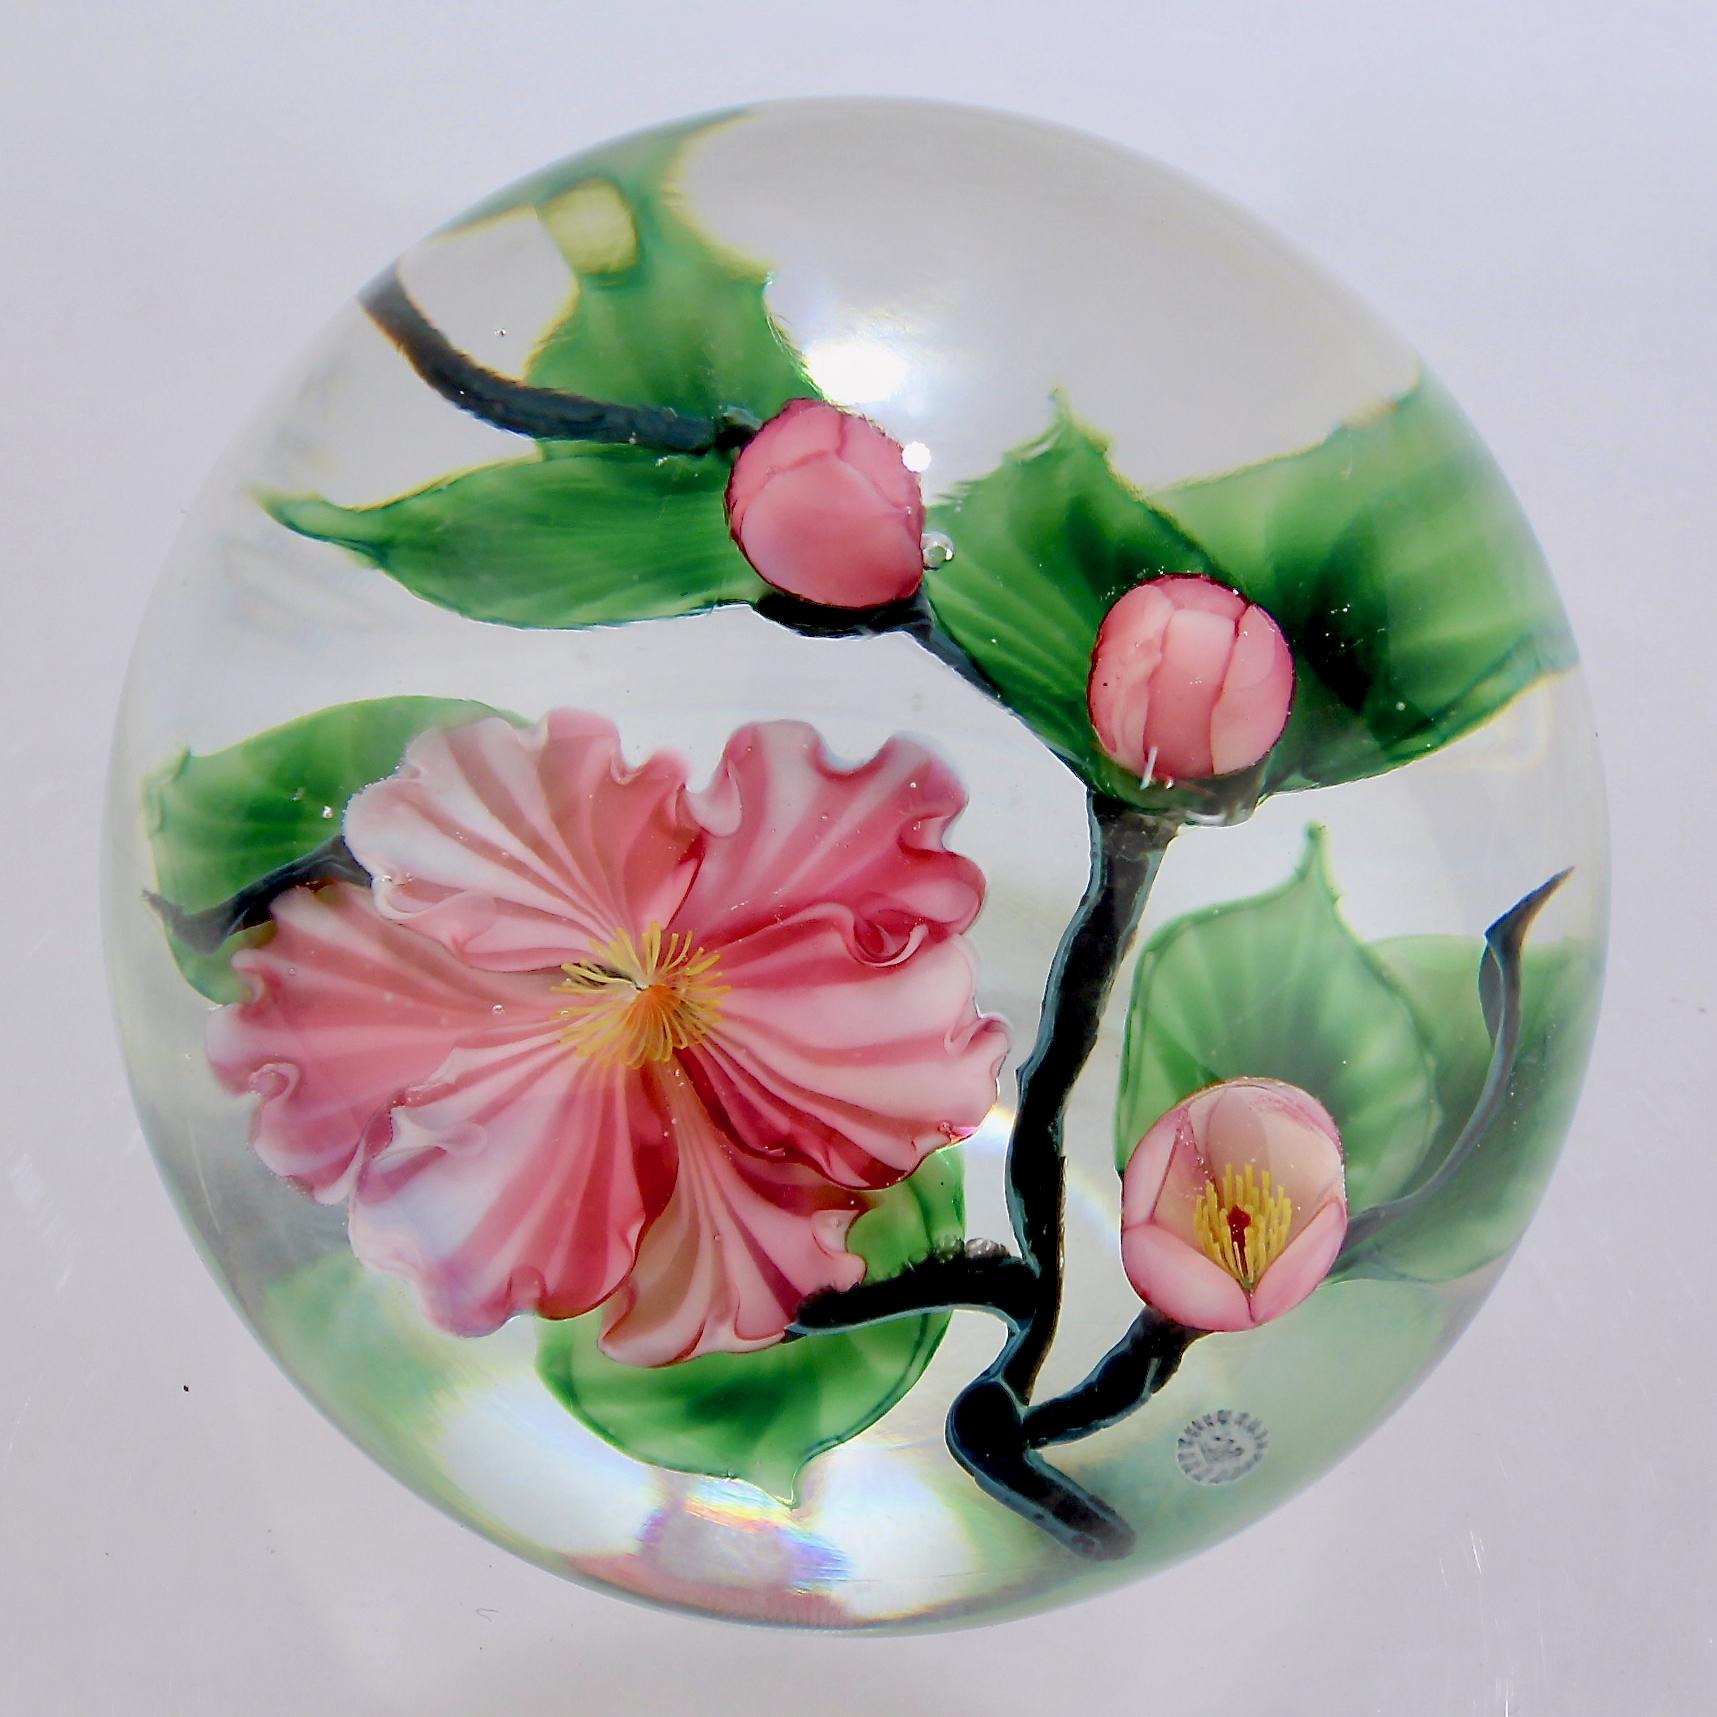 A fine Lundberg Studios paperweight by Daniel Salazar.

With a lampwork cherry blossom and 3 small cherry flower buds on a branch.

Bearing a Lundberg Studios signature cane below the flowers and an etched signature to the foot. 

Simply a